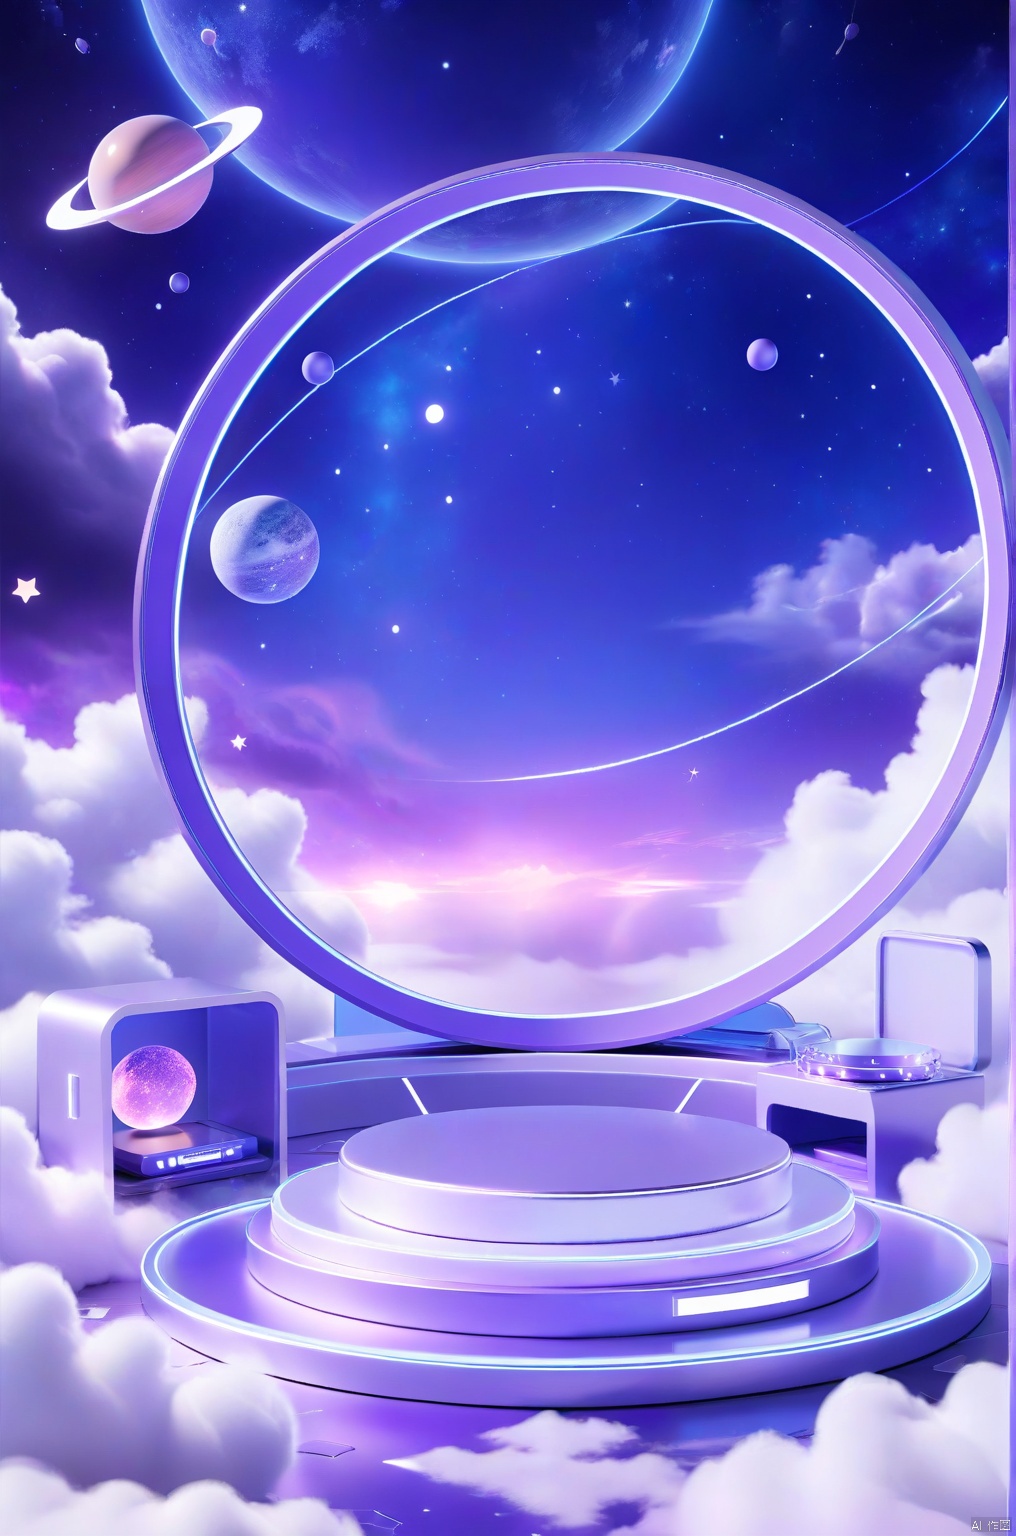 E-commerce booth, a round podium on the ground in the middle,  

purple futuristic scene theme, 
clouds, starry sky, planets in the sky, glowing beam in the background, 

professional 3d model, anime artwork pixar, 3d style, good shine, OC rendering, highly detailed, volumetric, dramatic lighting,